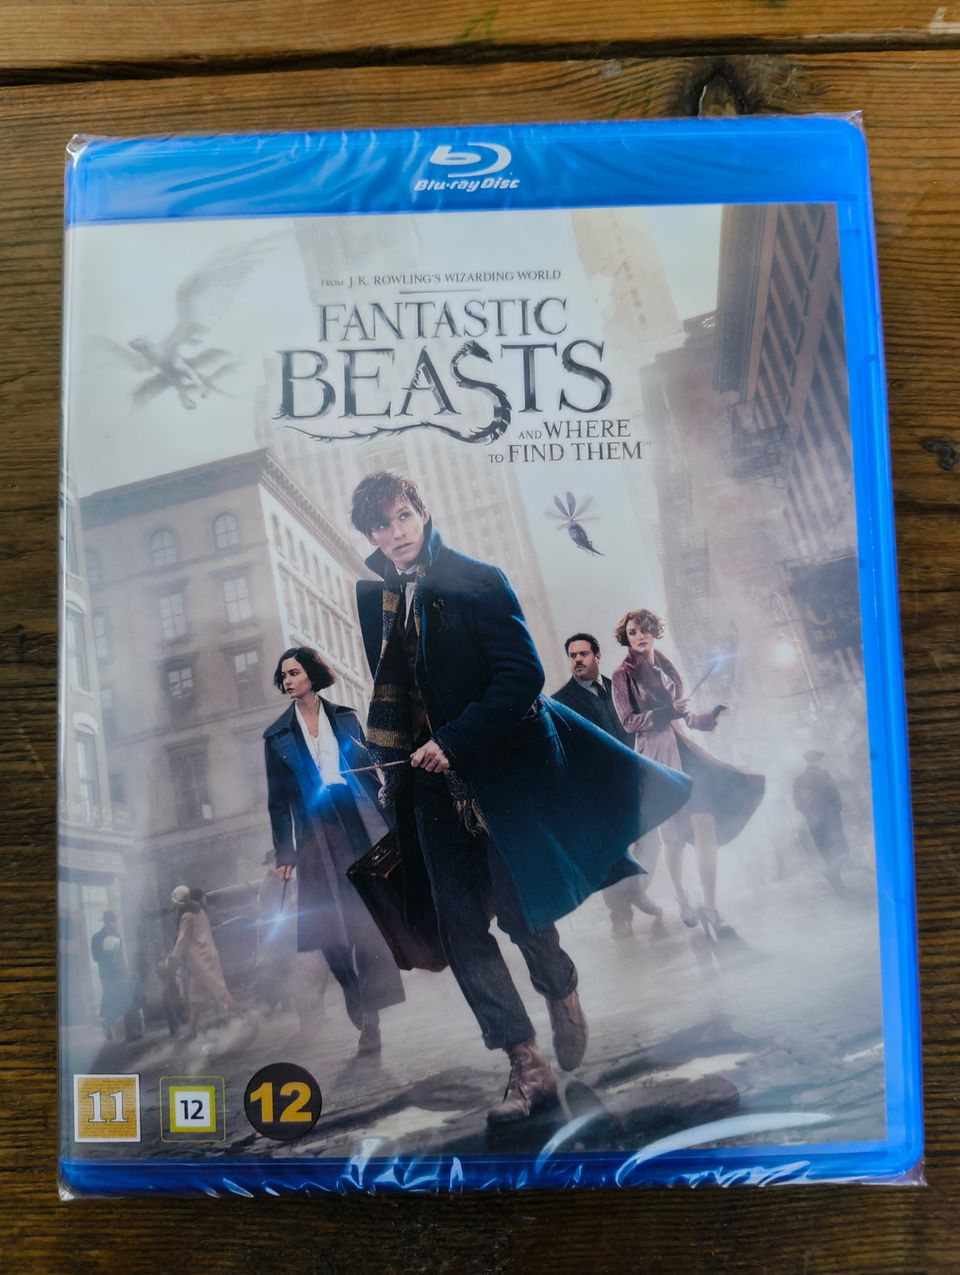 Fantastic beasts and where to find them - bluray